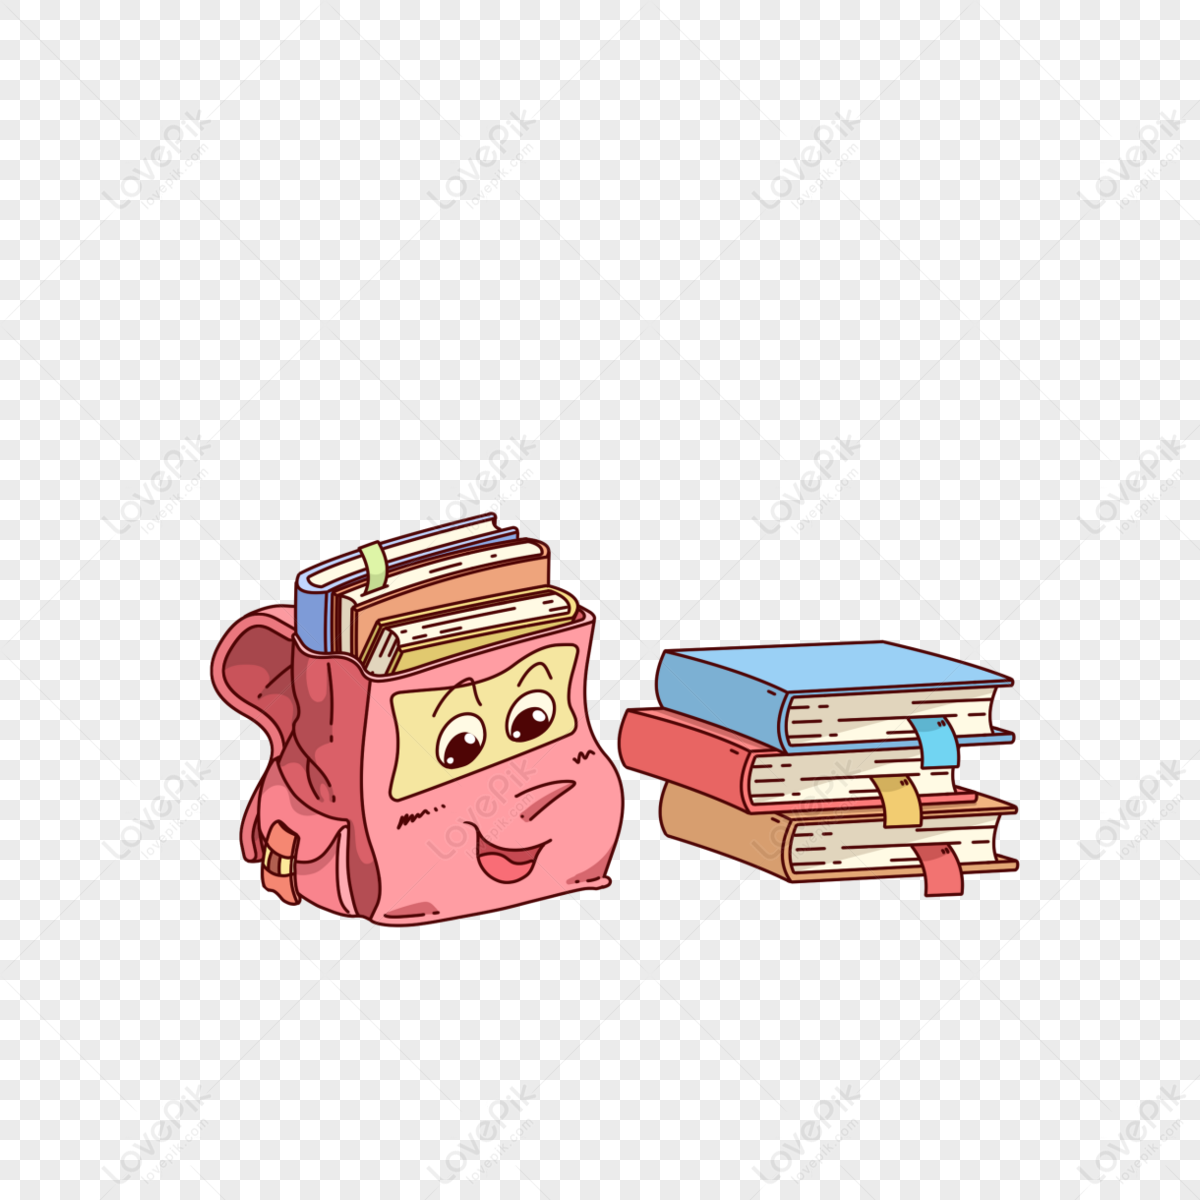 Cartoon hand-painted school books stationery design,student,pencils png hd transparent image